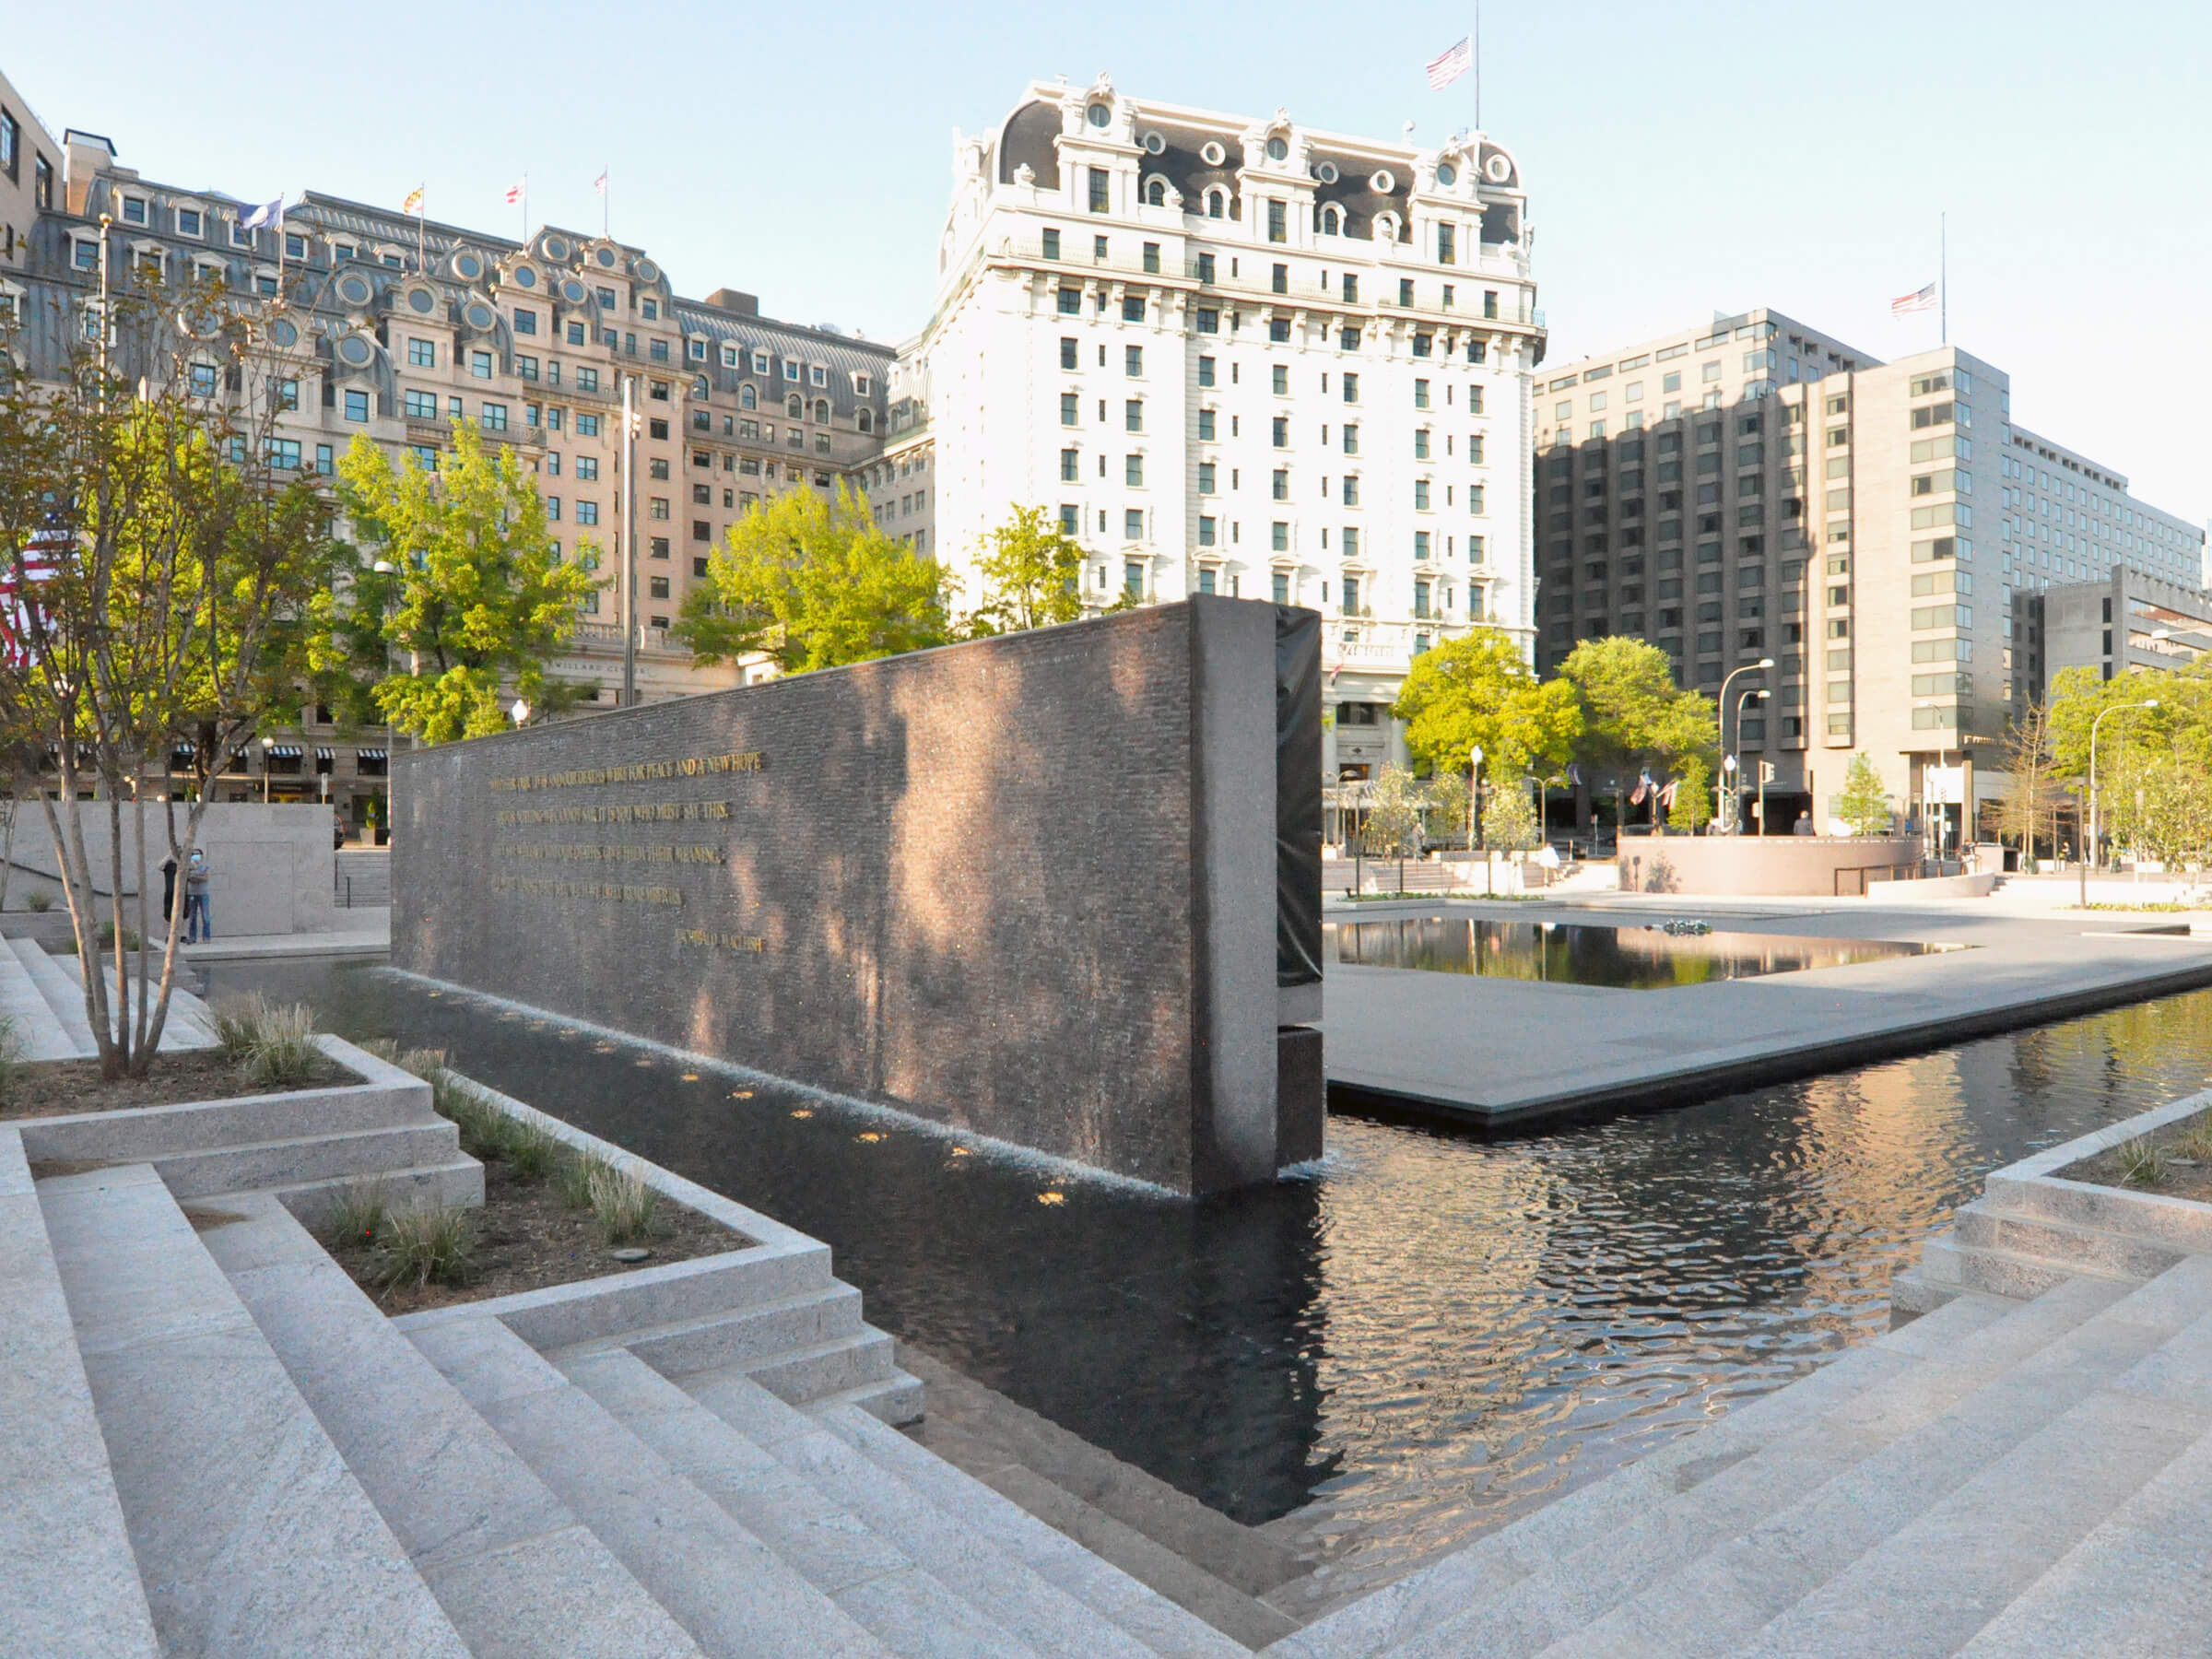 The new WW1 memorial in DC, fronting a reflecting pool